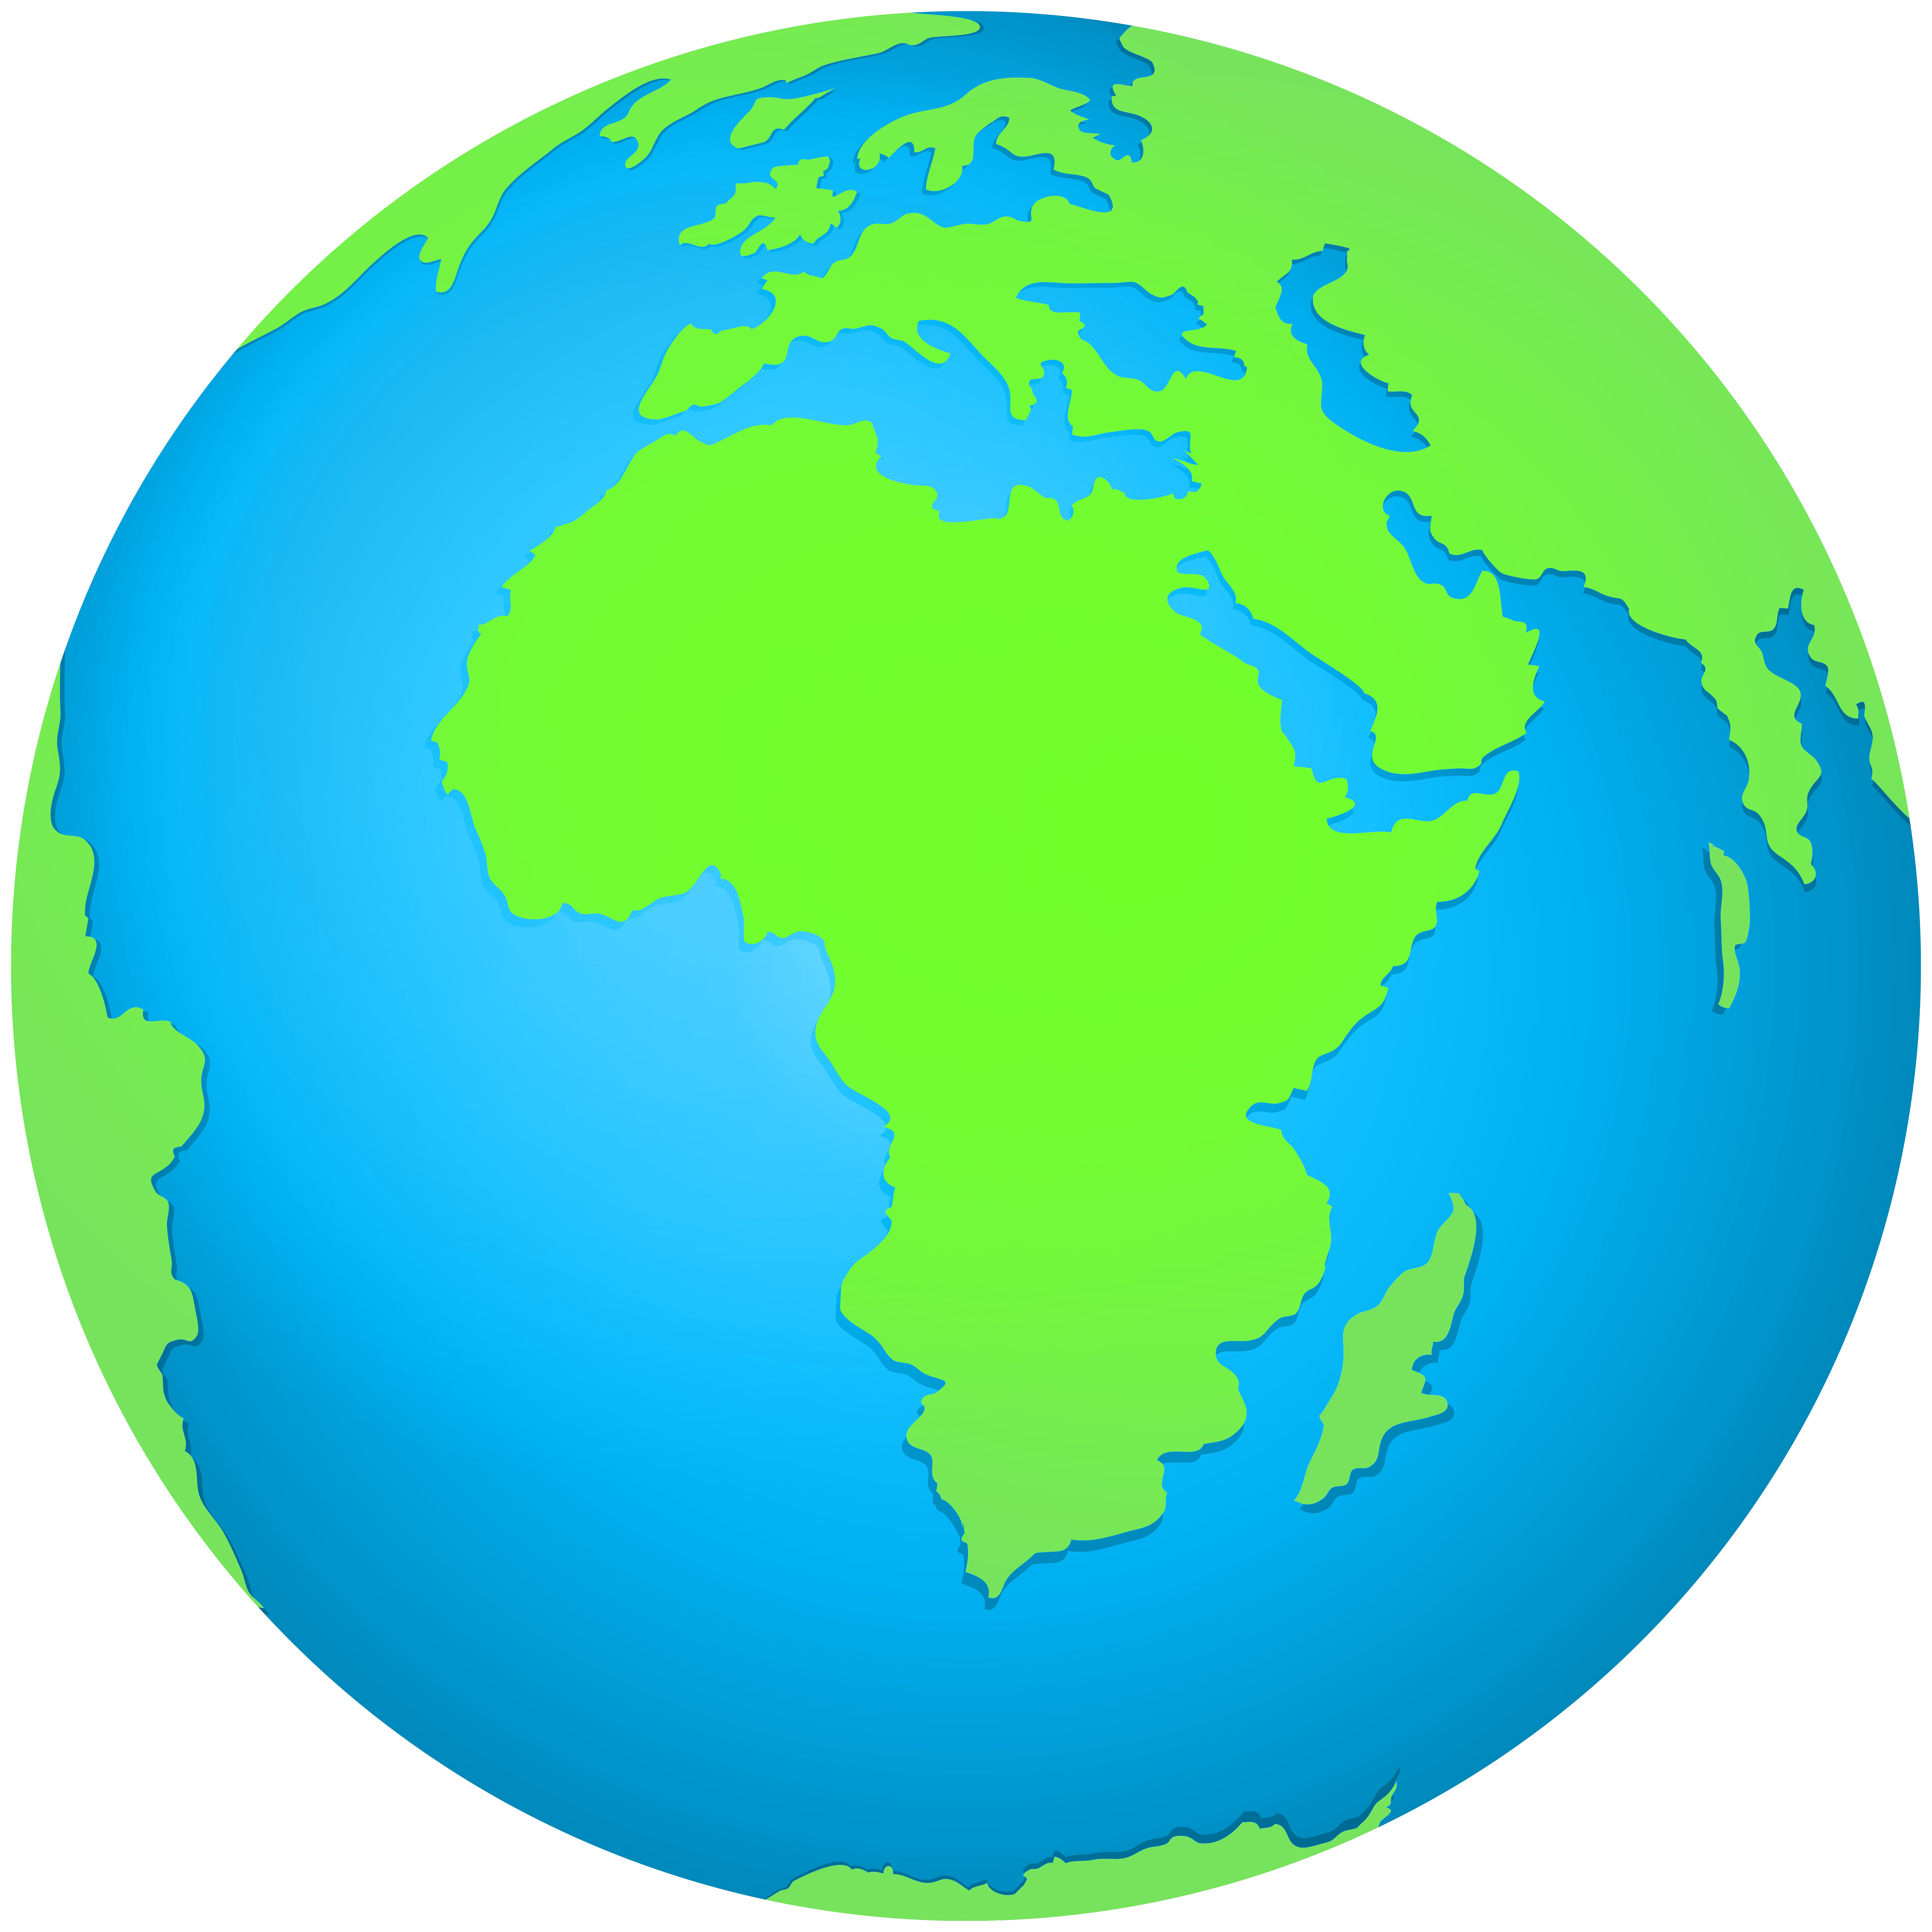 Download 32 Green Earth Png Image